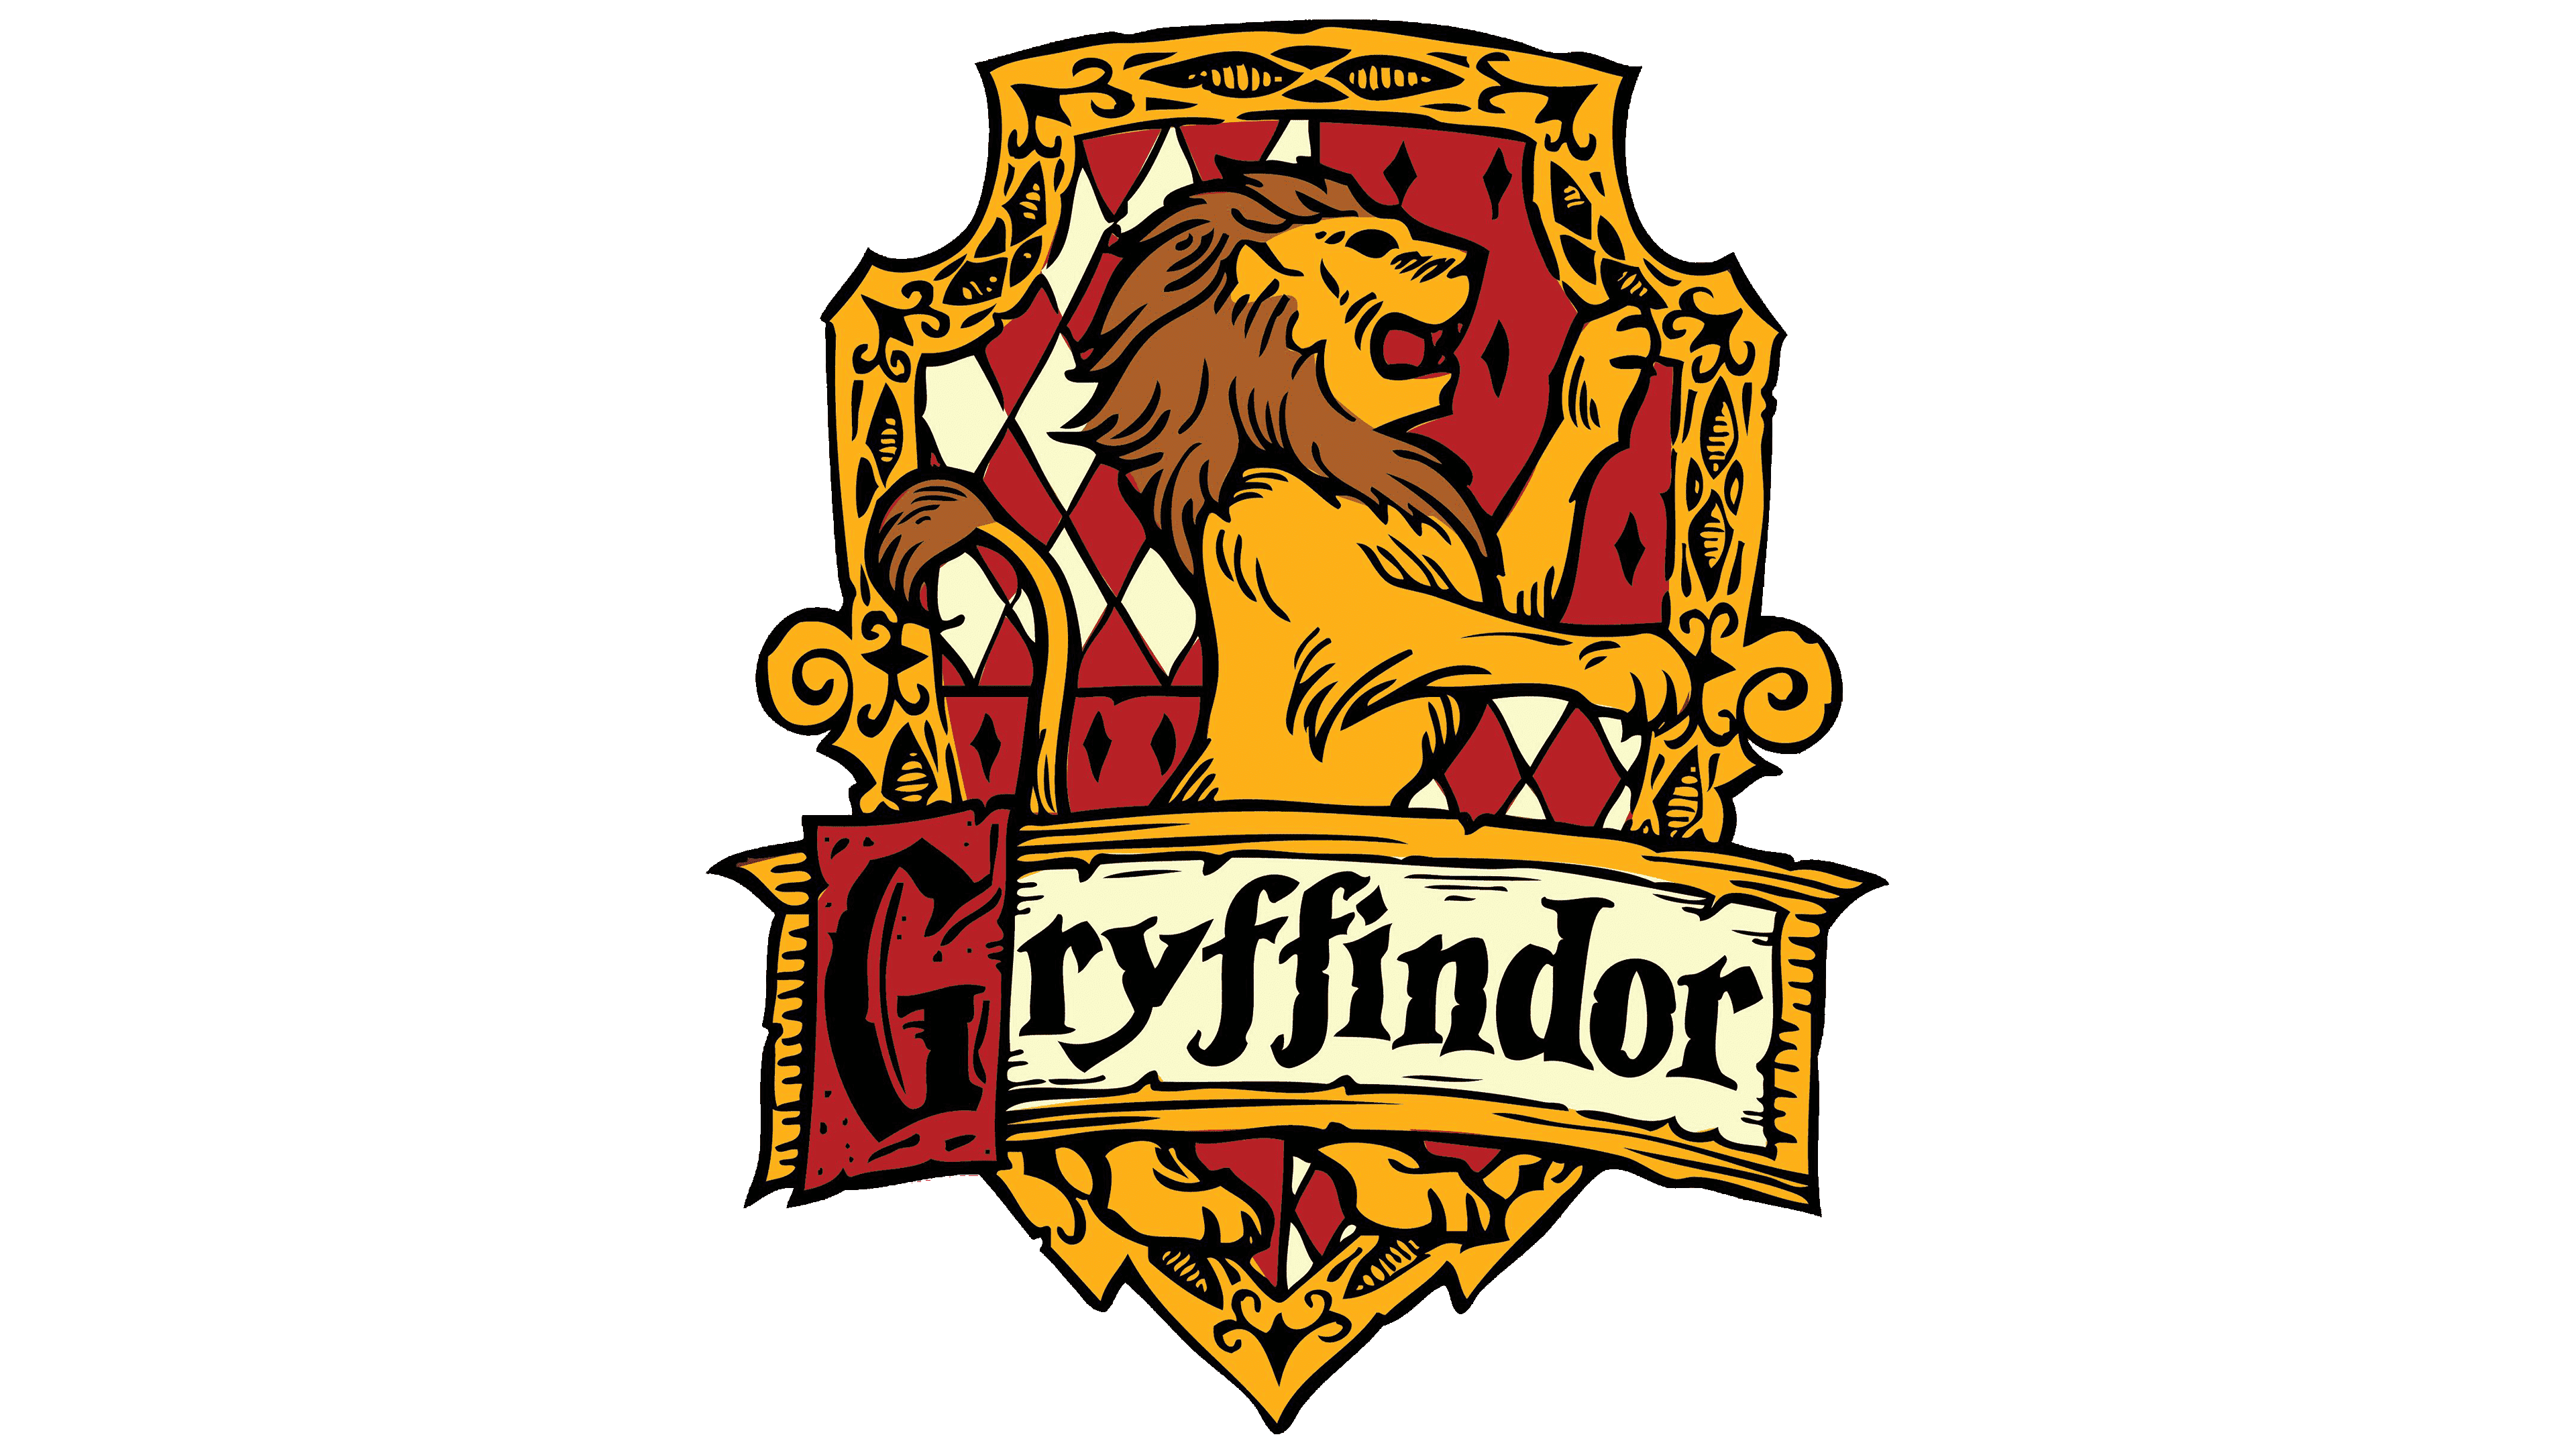 Harry Potter - Gryffindor logo w.lion Wall Poster Photographic Paper -  Movies posters in India - Buy art, film, design, movie, music, nature and  educational paintings/wallpapers at Flipkart.com